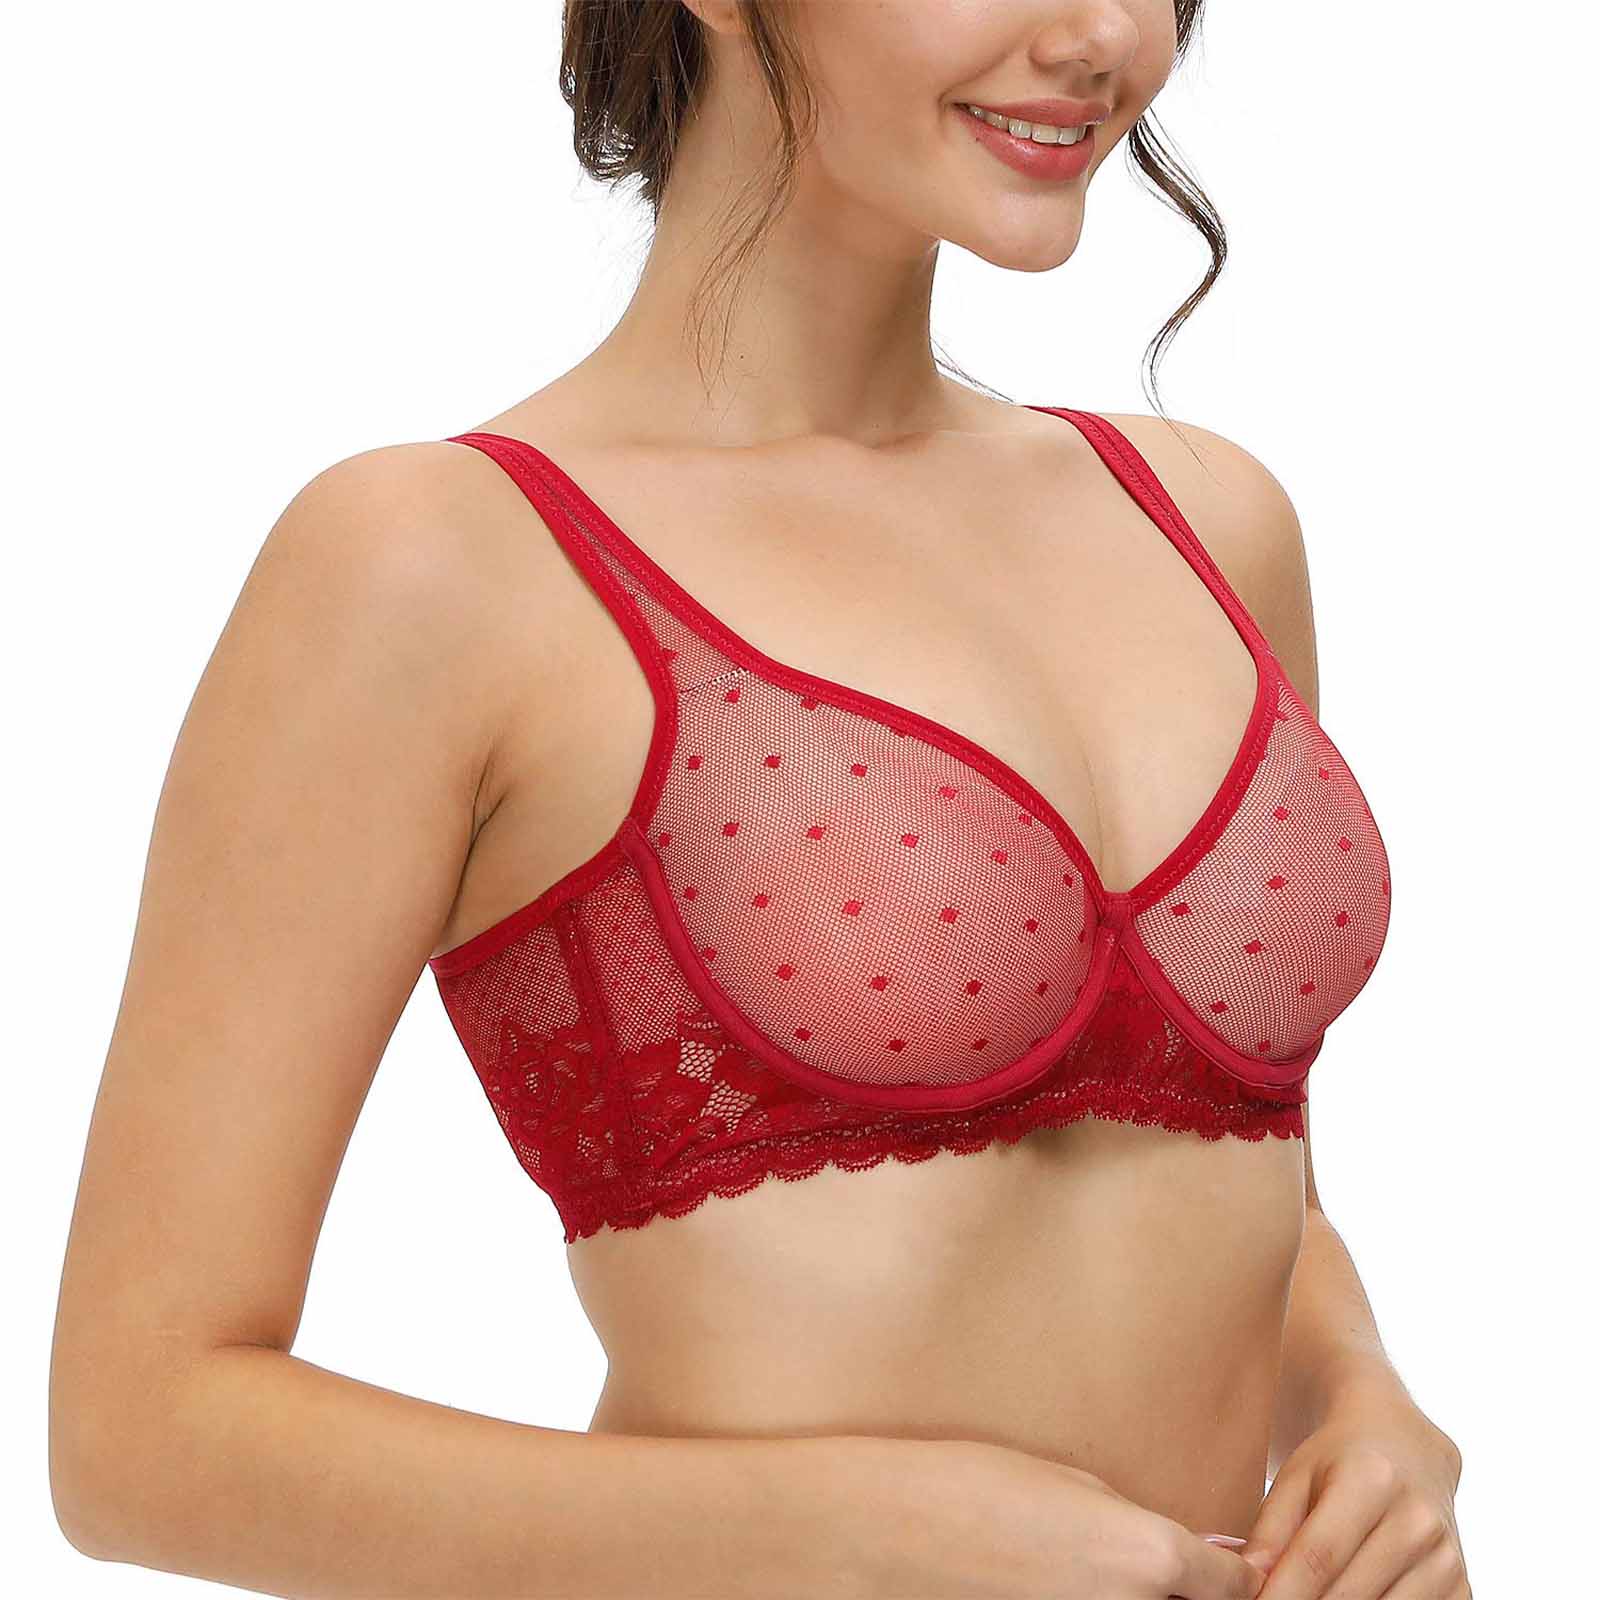 Vgplay Full Cup Lace Lingerie Minimizer Ultra Thin See Through